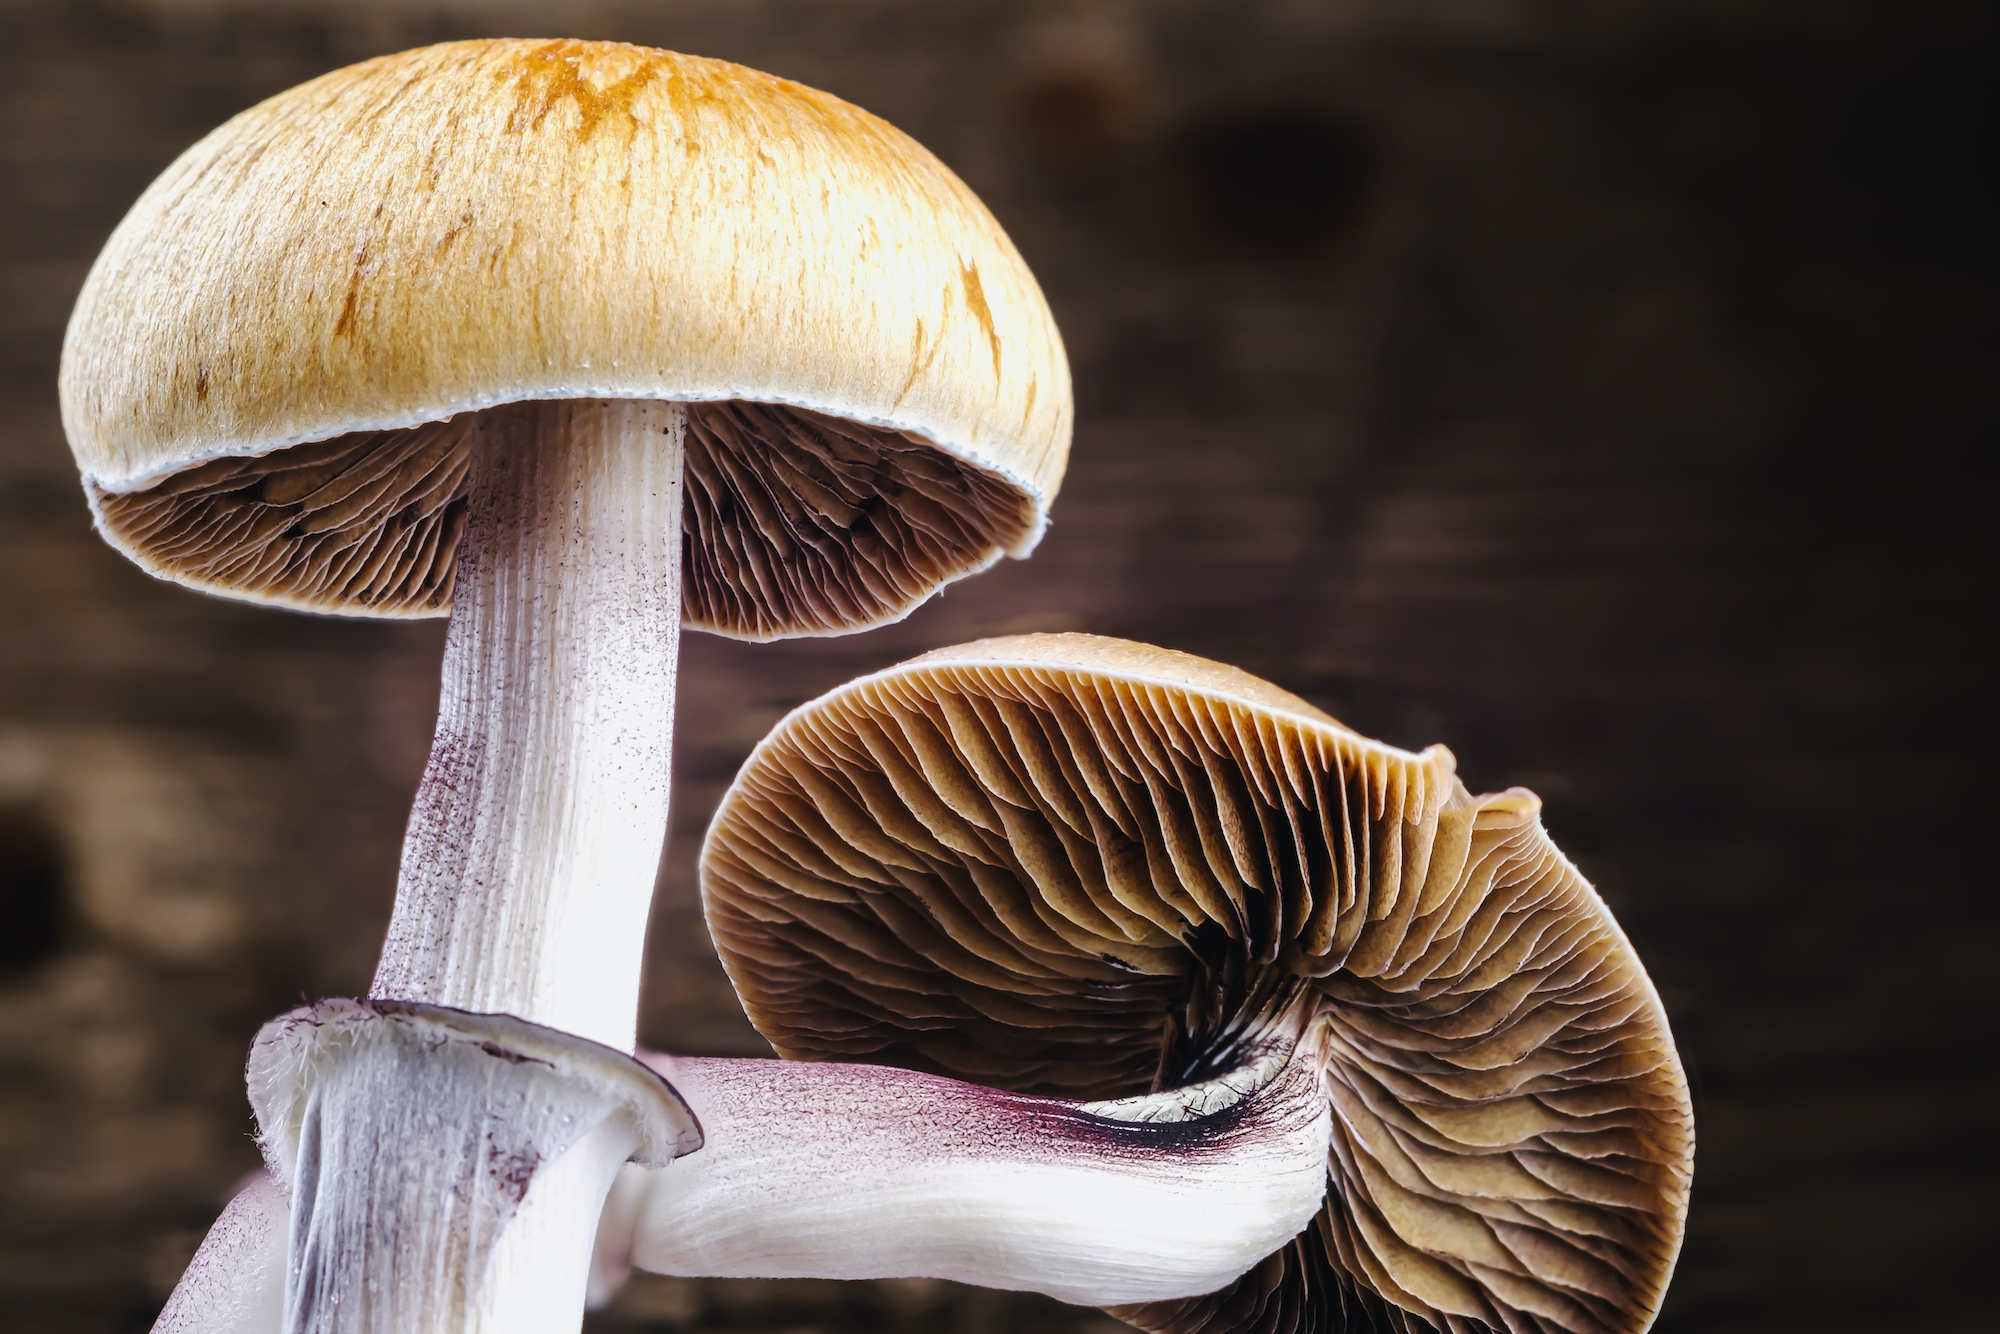 The Mexican magic mushroom is a psilocybe cubensis, whose main active elements are psilocybin and psilocin - Mexican Psilocybe Cubensis. An adult mushroom raining spores